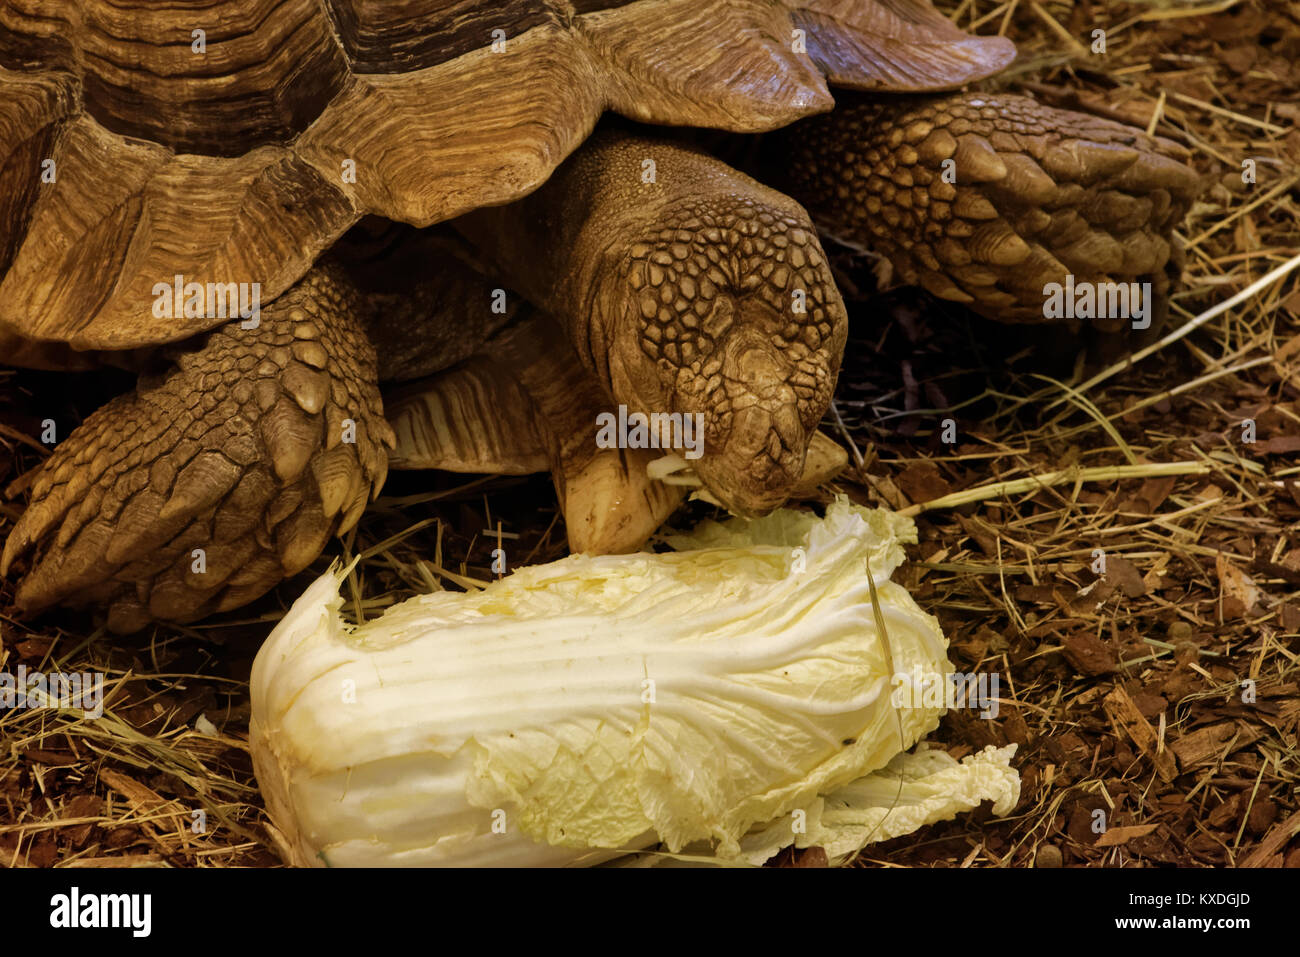 African spurred tortoise (Centrochelys sulcata), also called the sulcata tortoise, is a species of tortoise, which inhabits the southern edge of the S Stock Photo